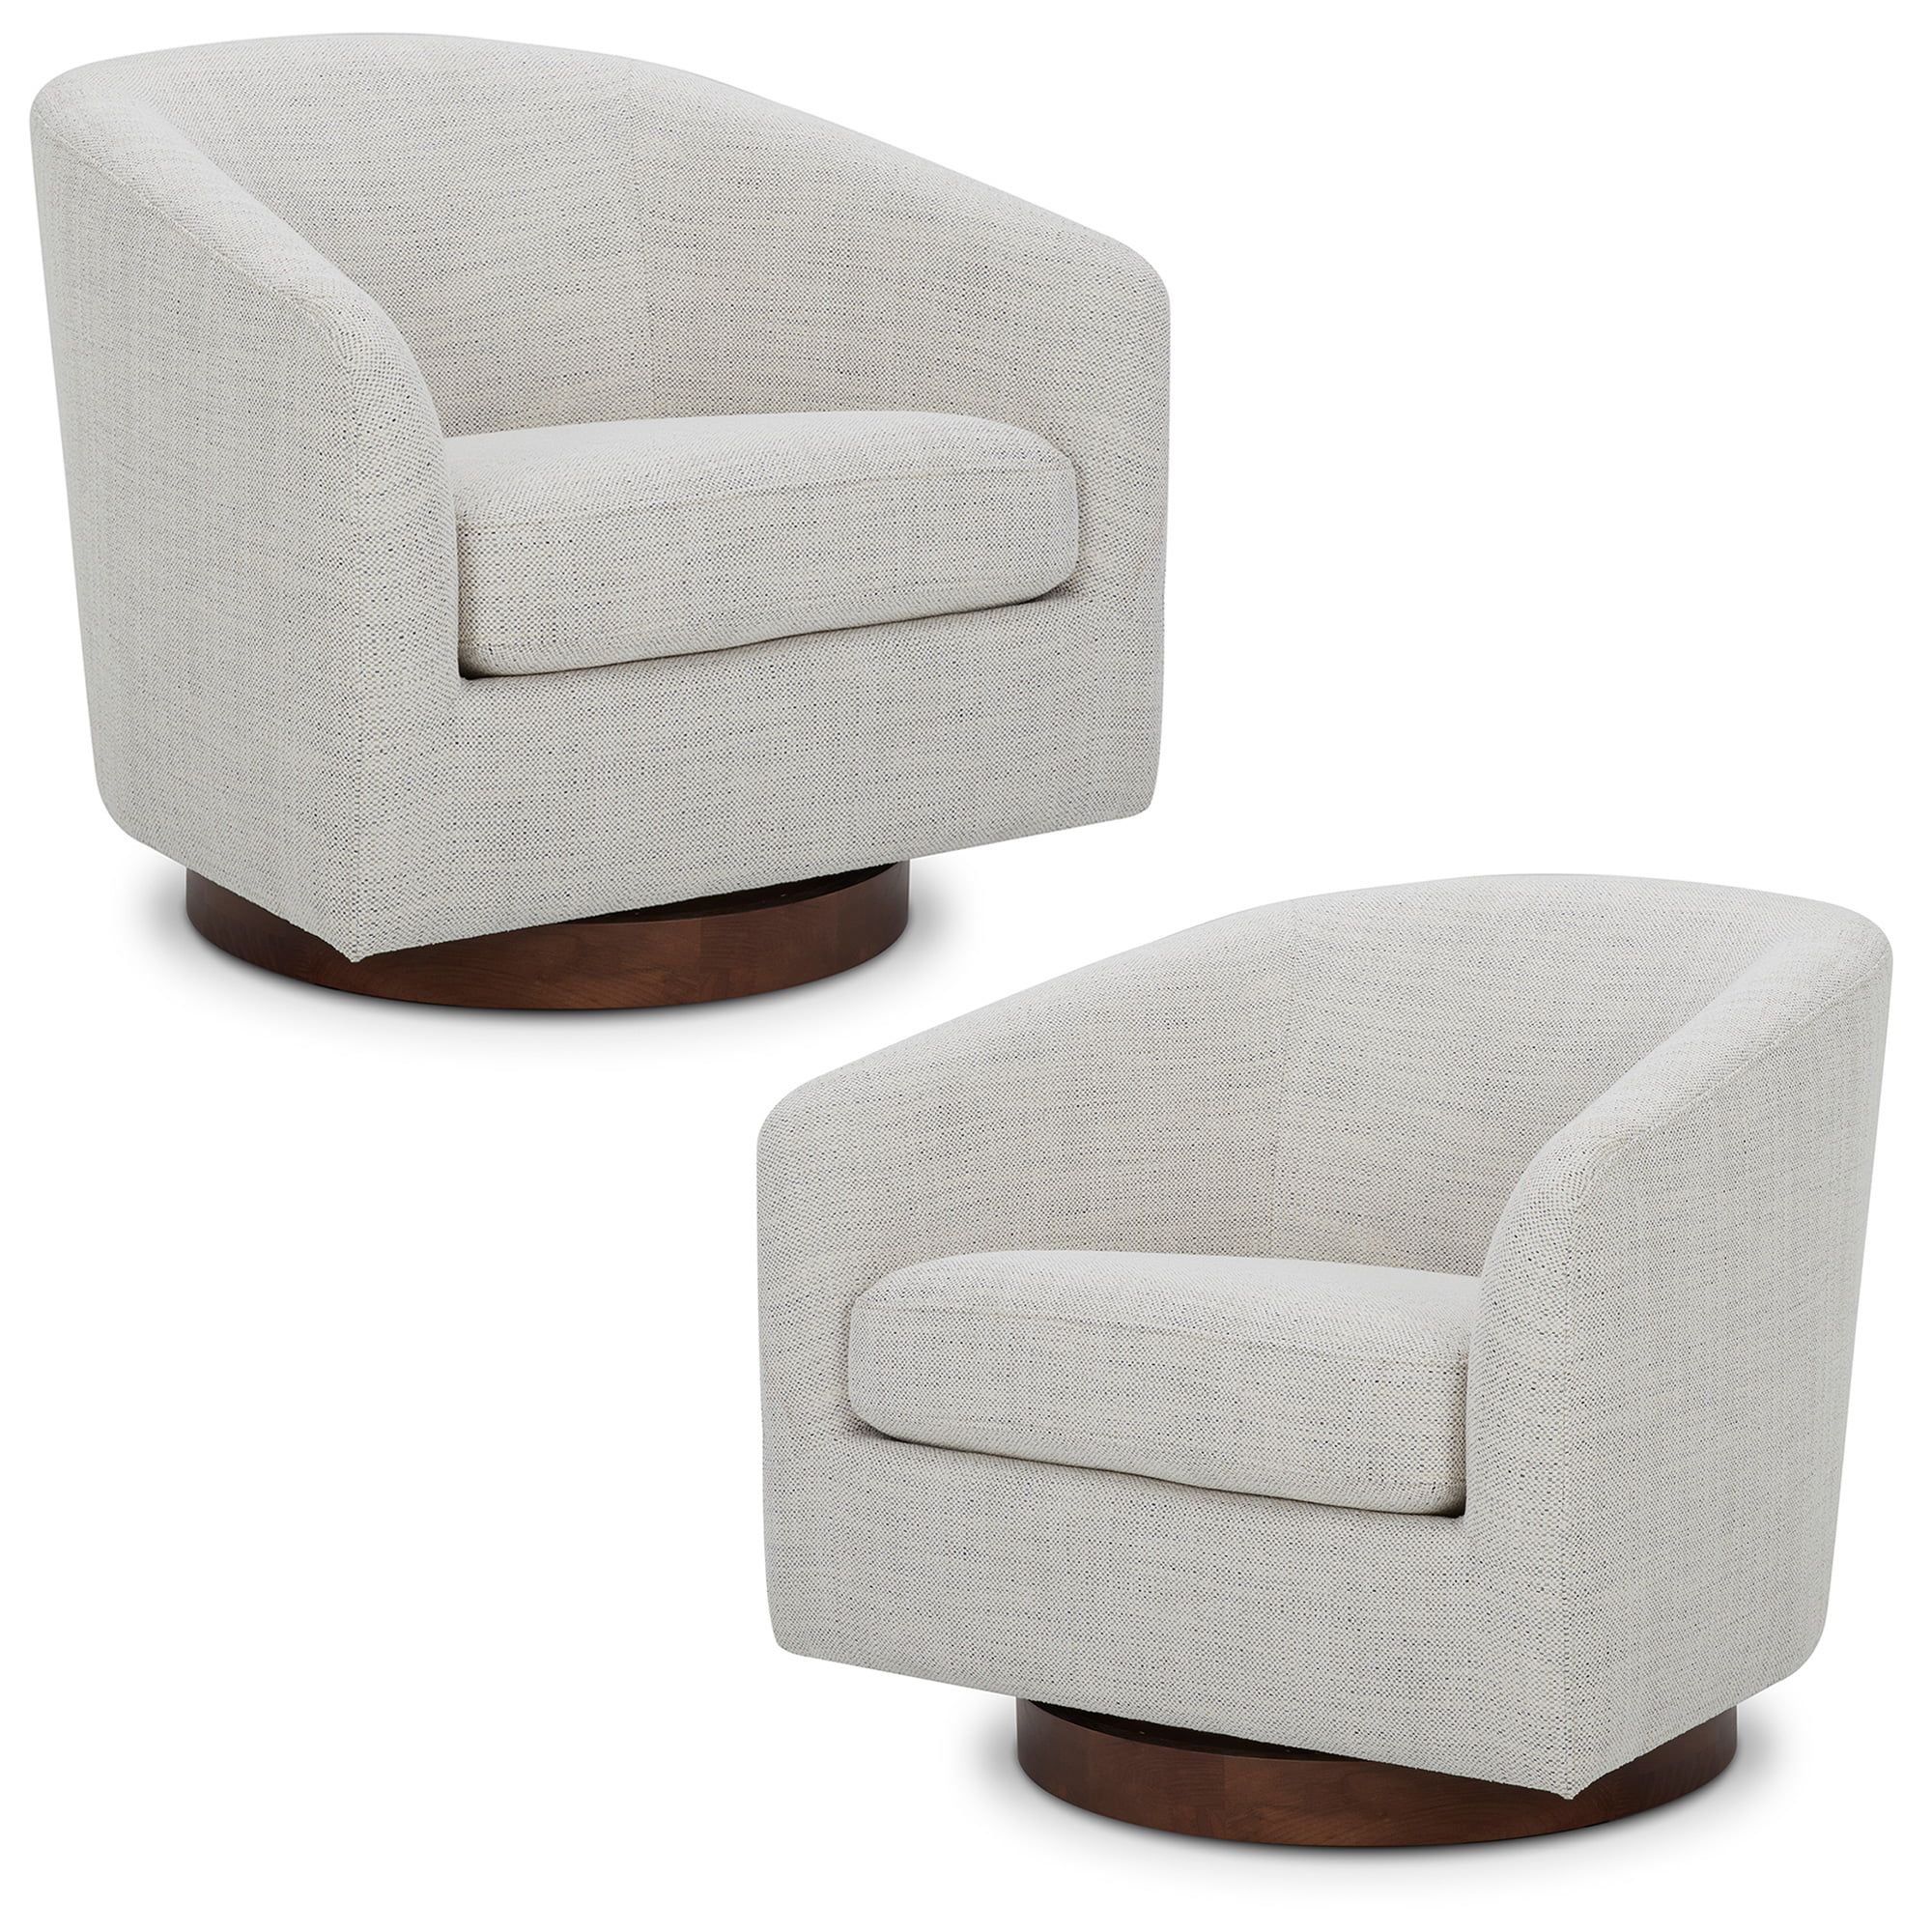 CHITA Swivel Accent Chair Set of 2, Fabric Round Barrel Arm Chair Living Room, Ivory White - Walm... | Walmart (US)